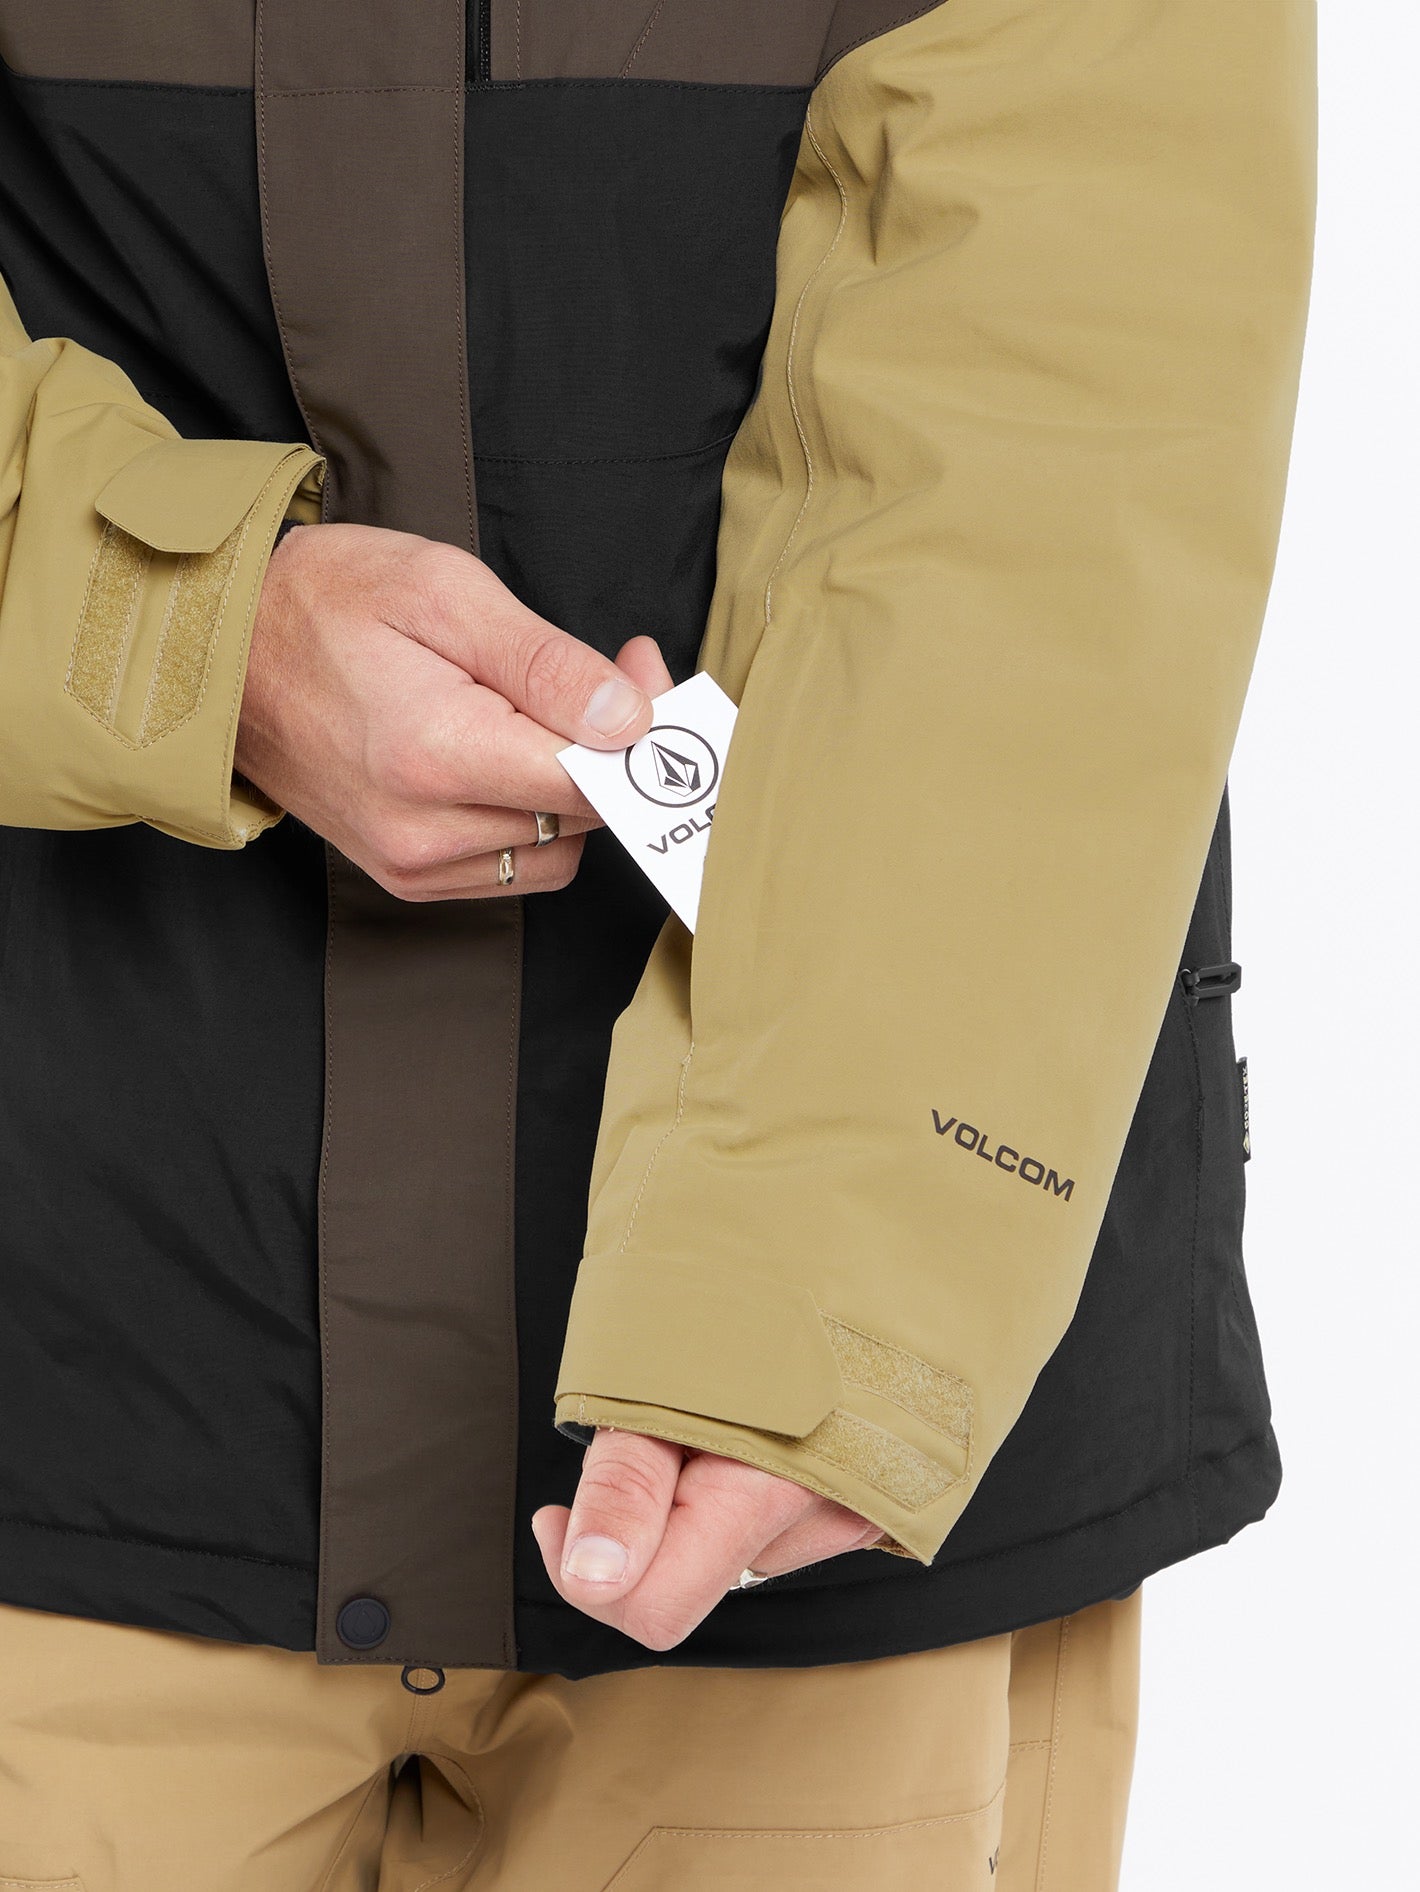 Mens L Insulated Gore-Tex Jacket - Brown – Volcom Canada